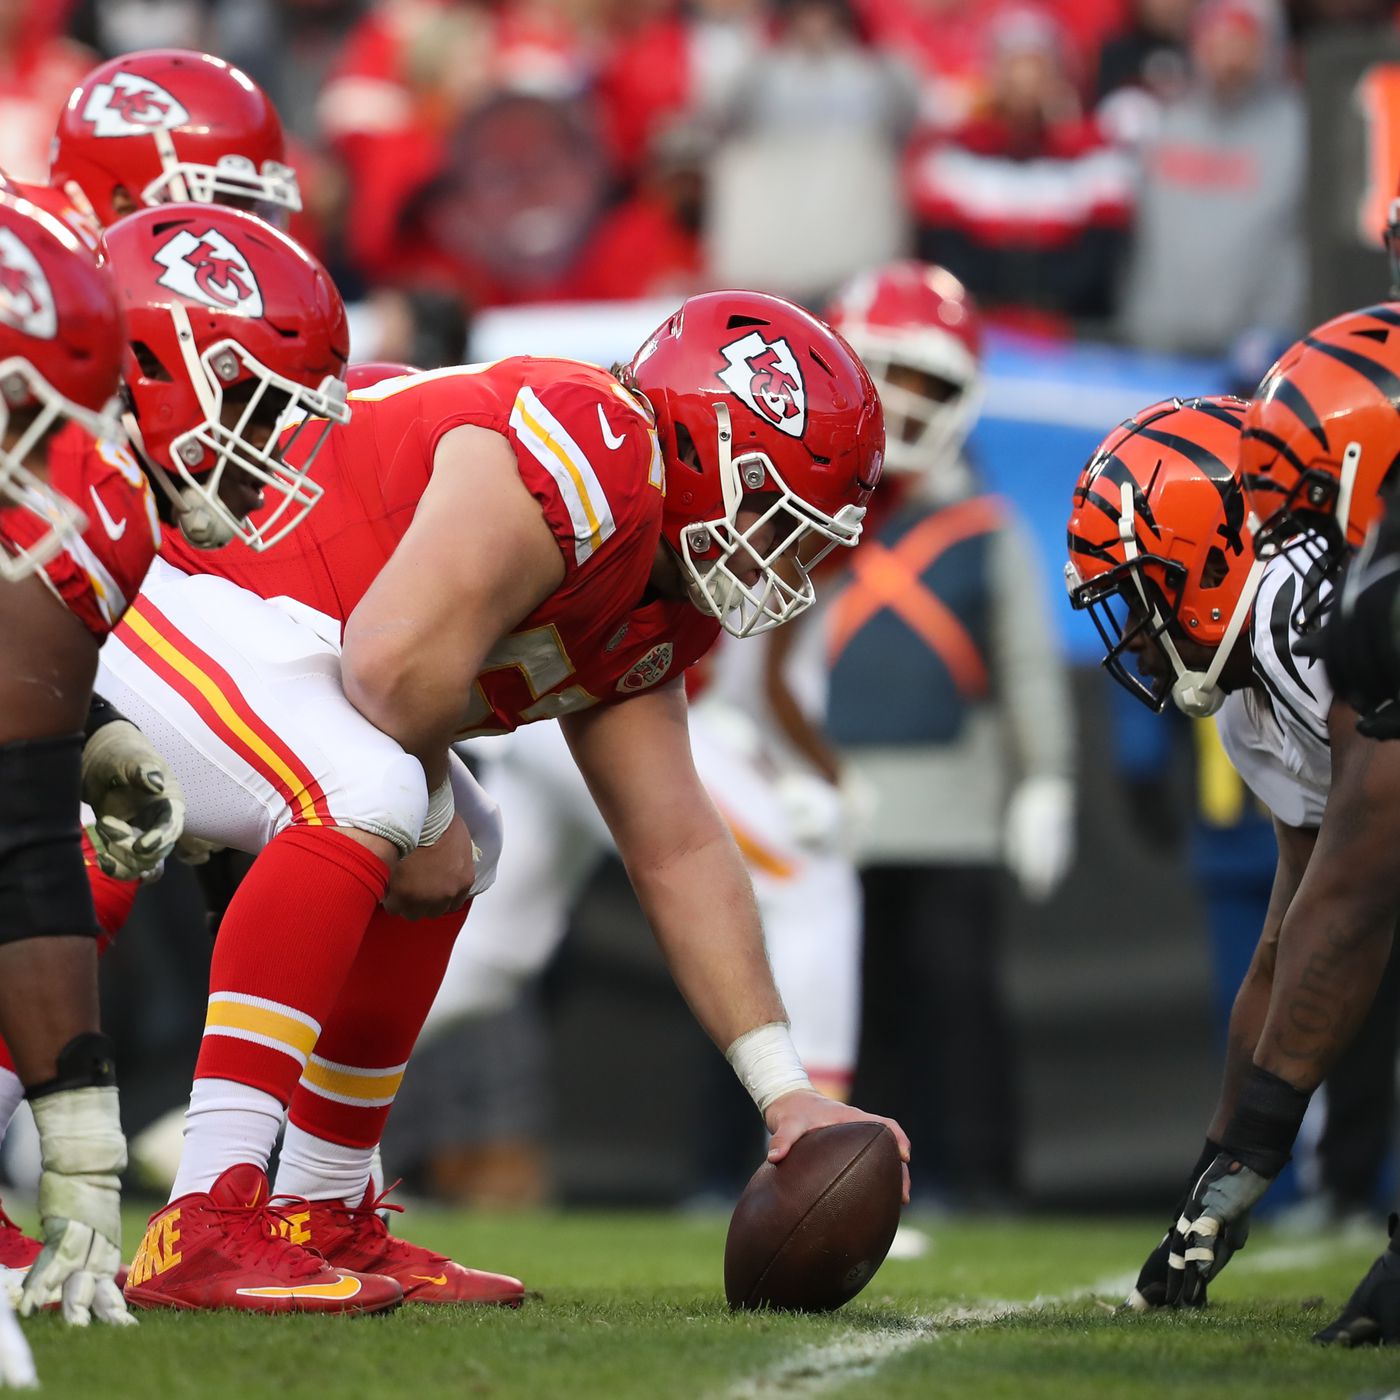 bets for bengals vs chiefs